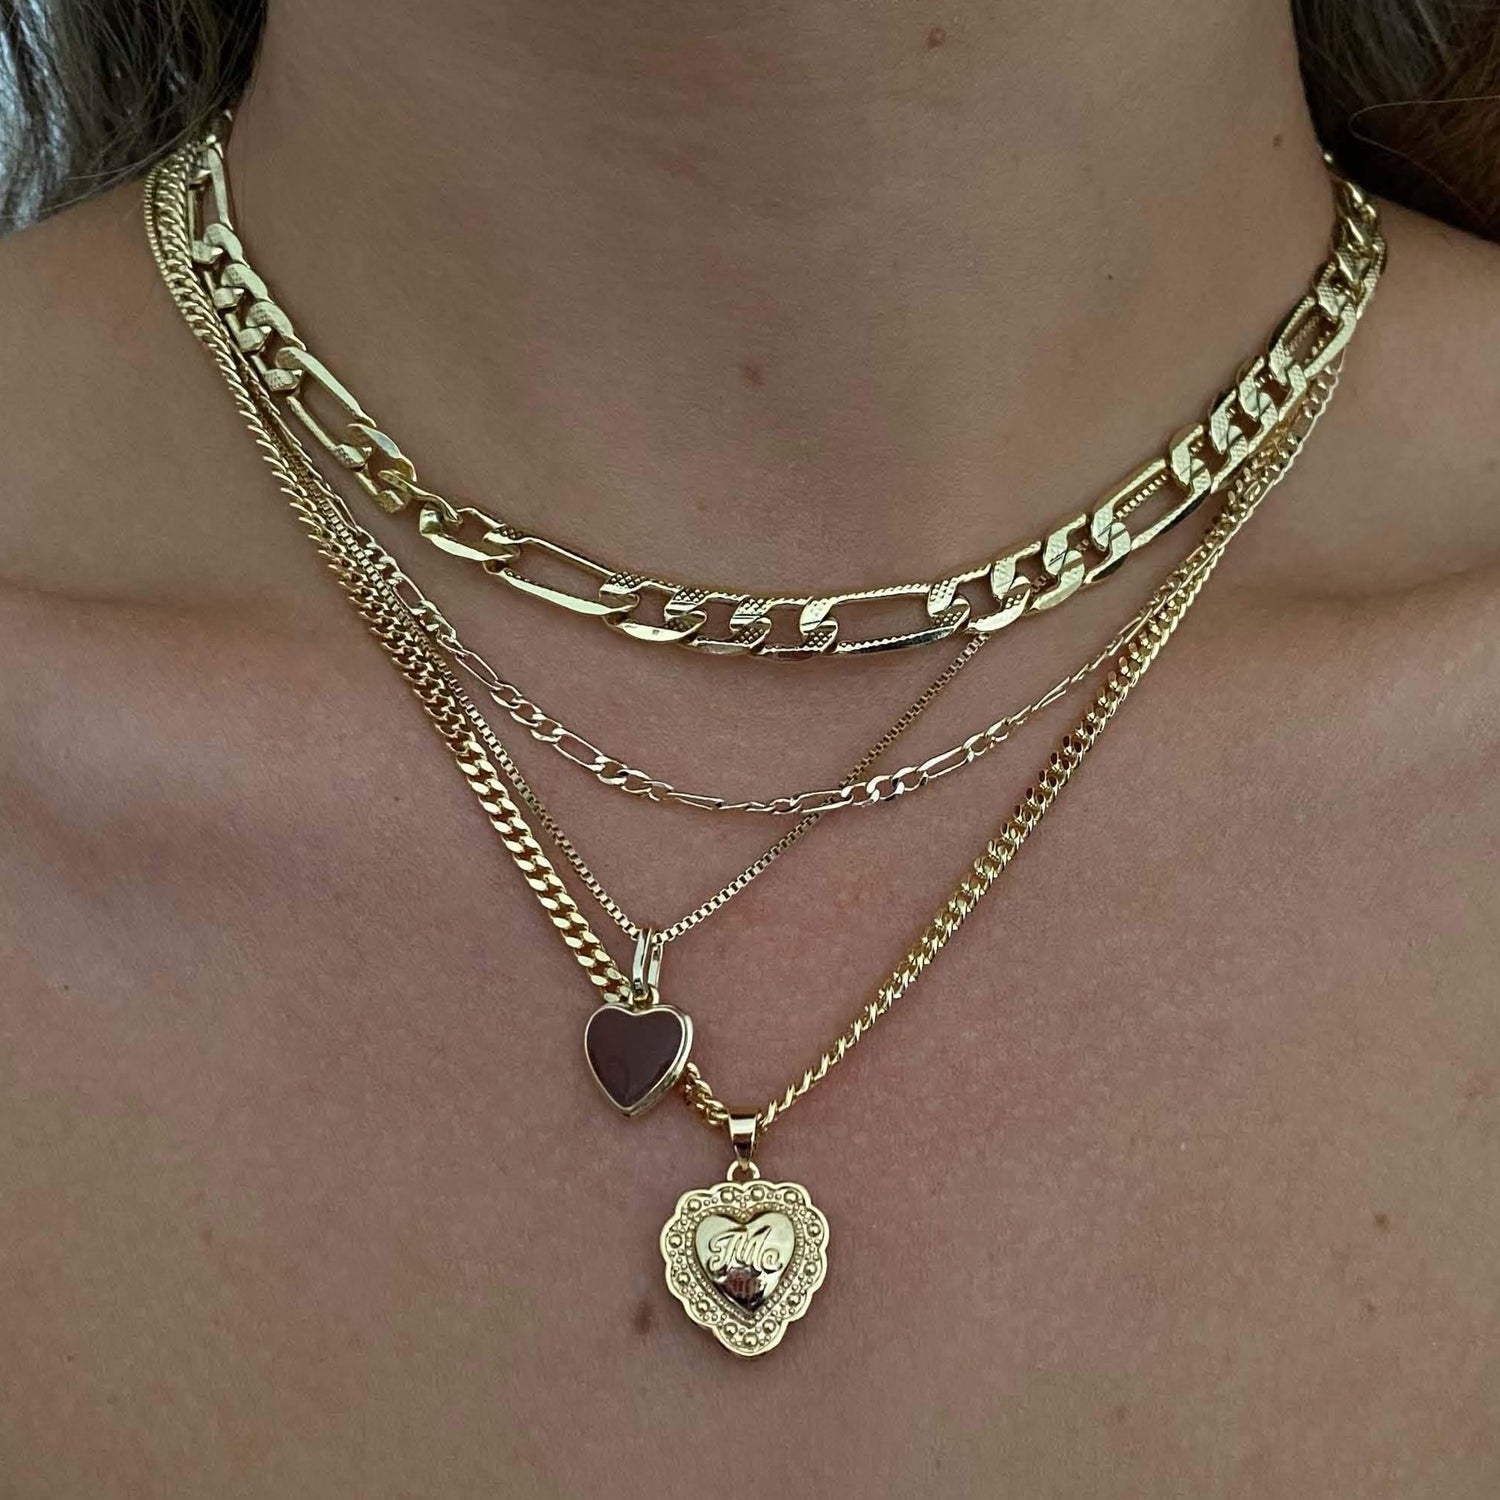 Self Obsessed Locket Necklace